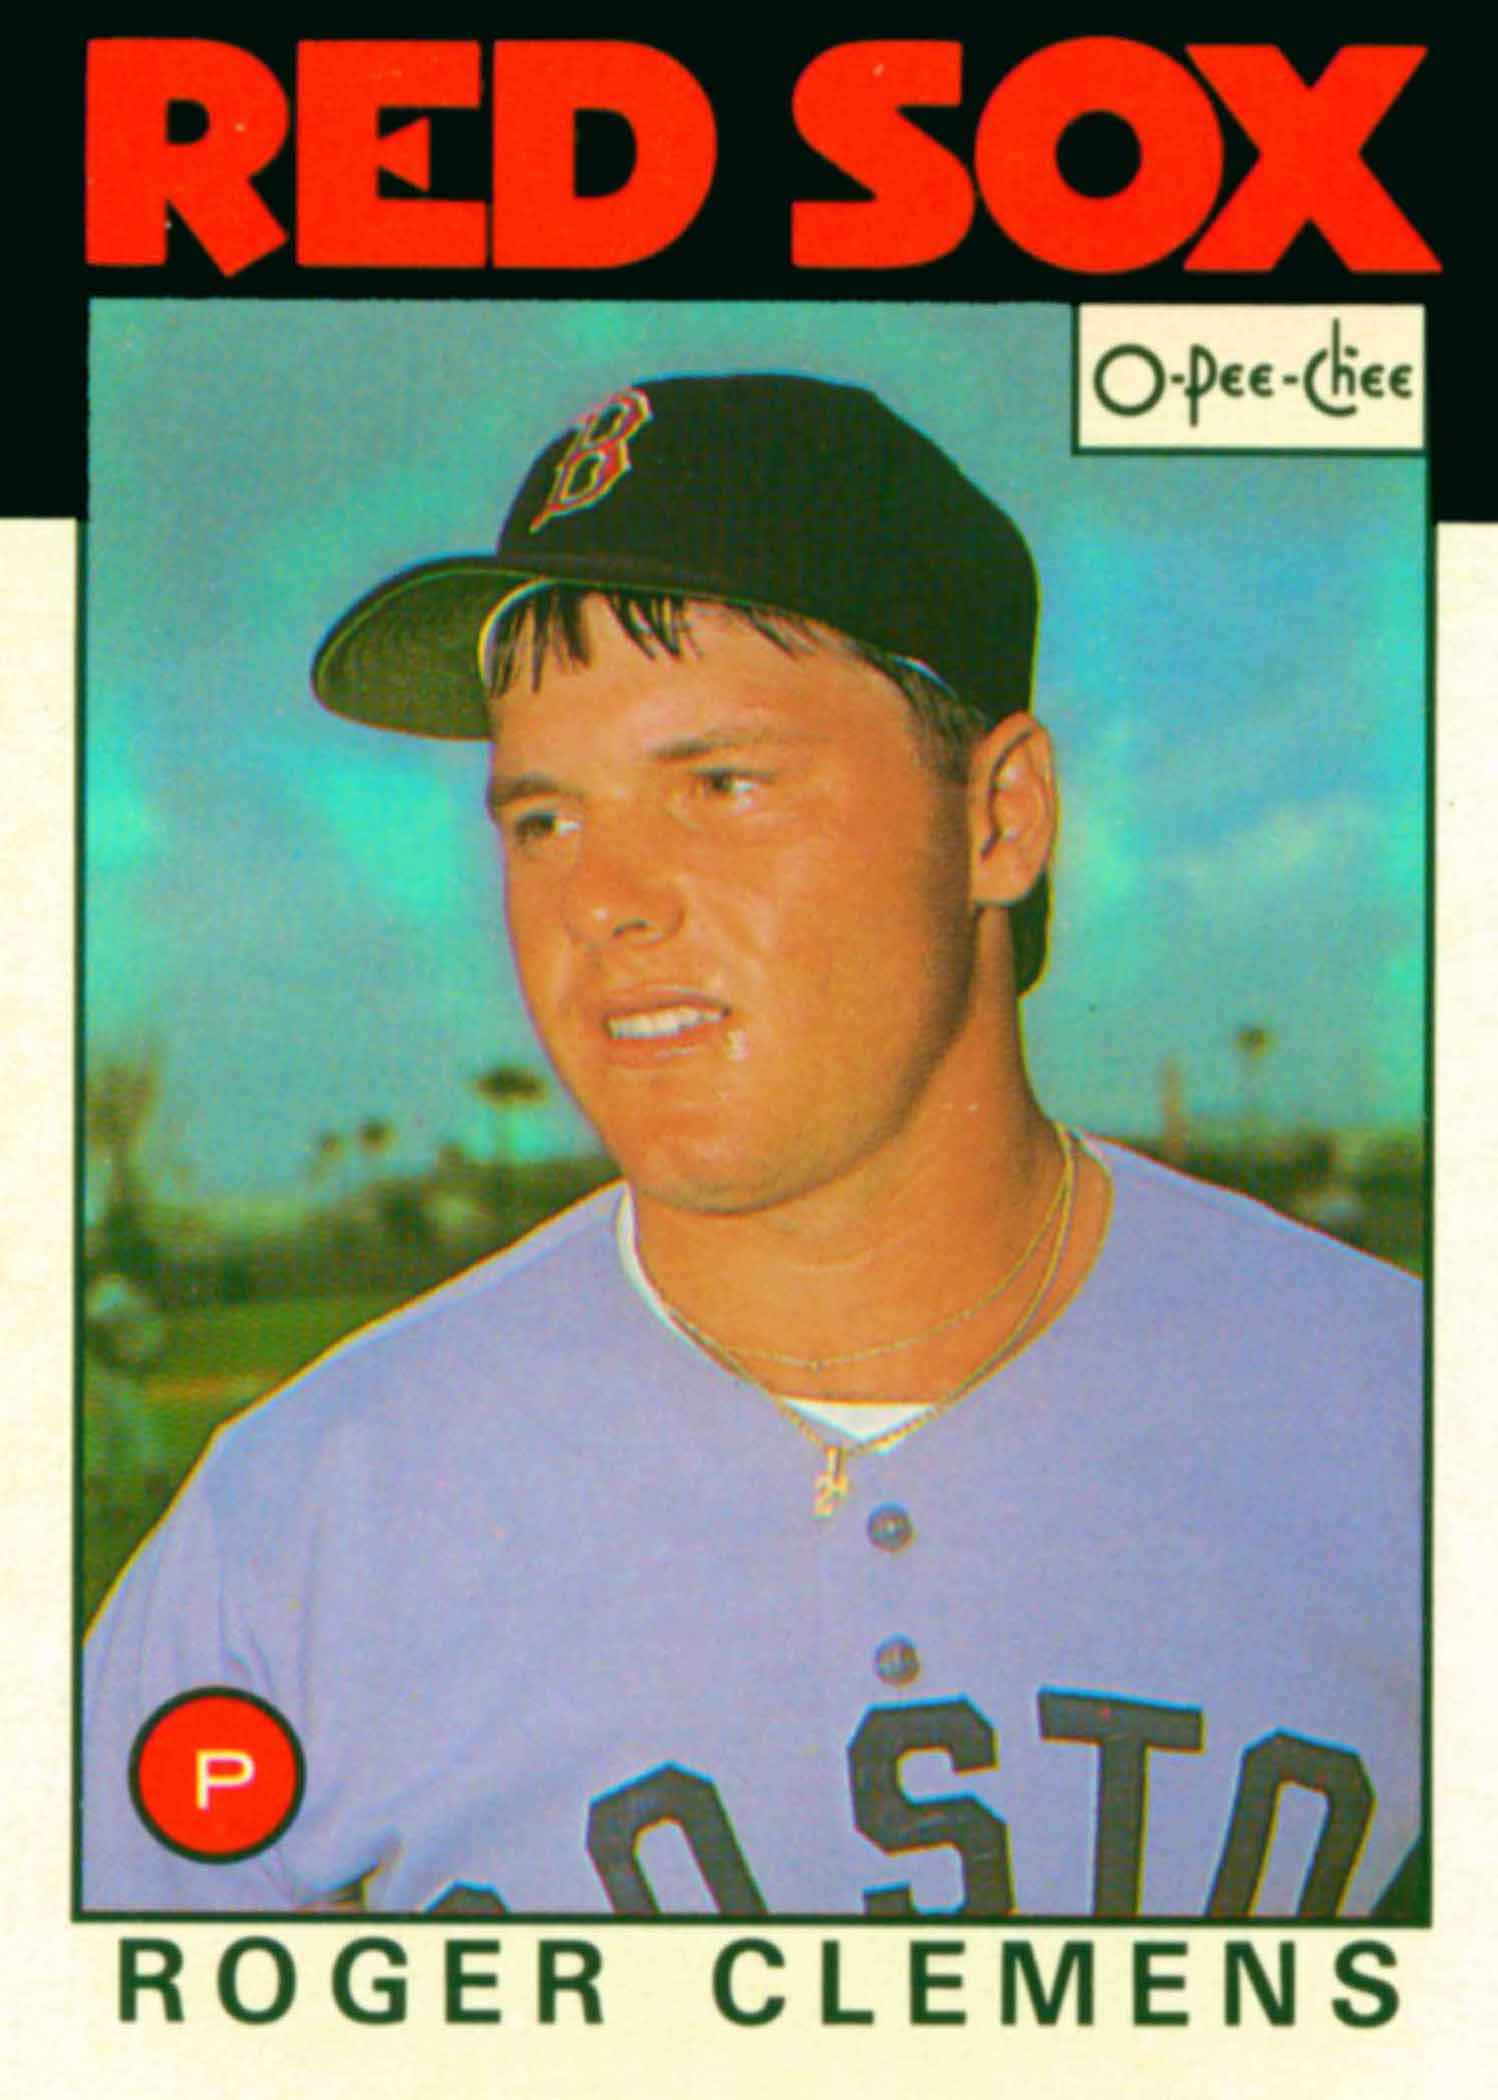 roger clemens red sox 1986